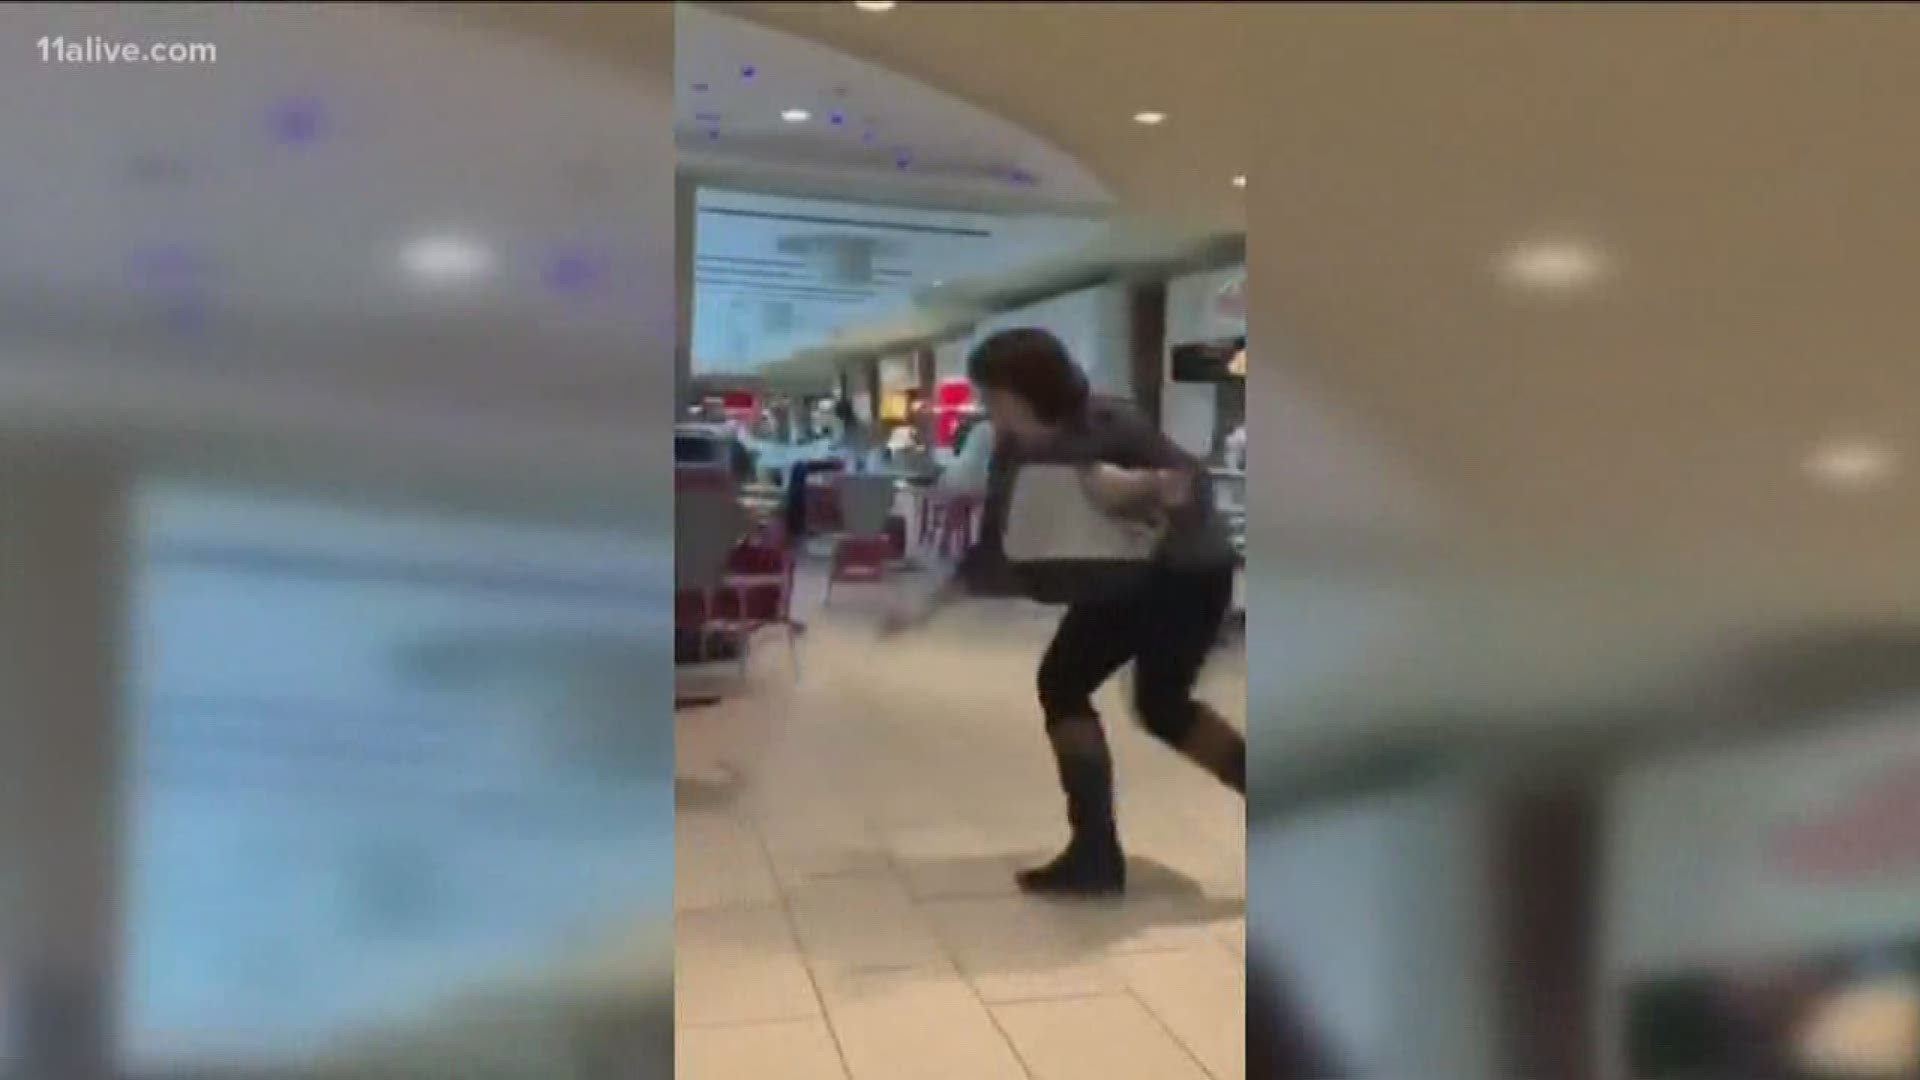 Video shared online shows the panic as shoppers rush for cover.